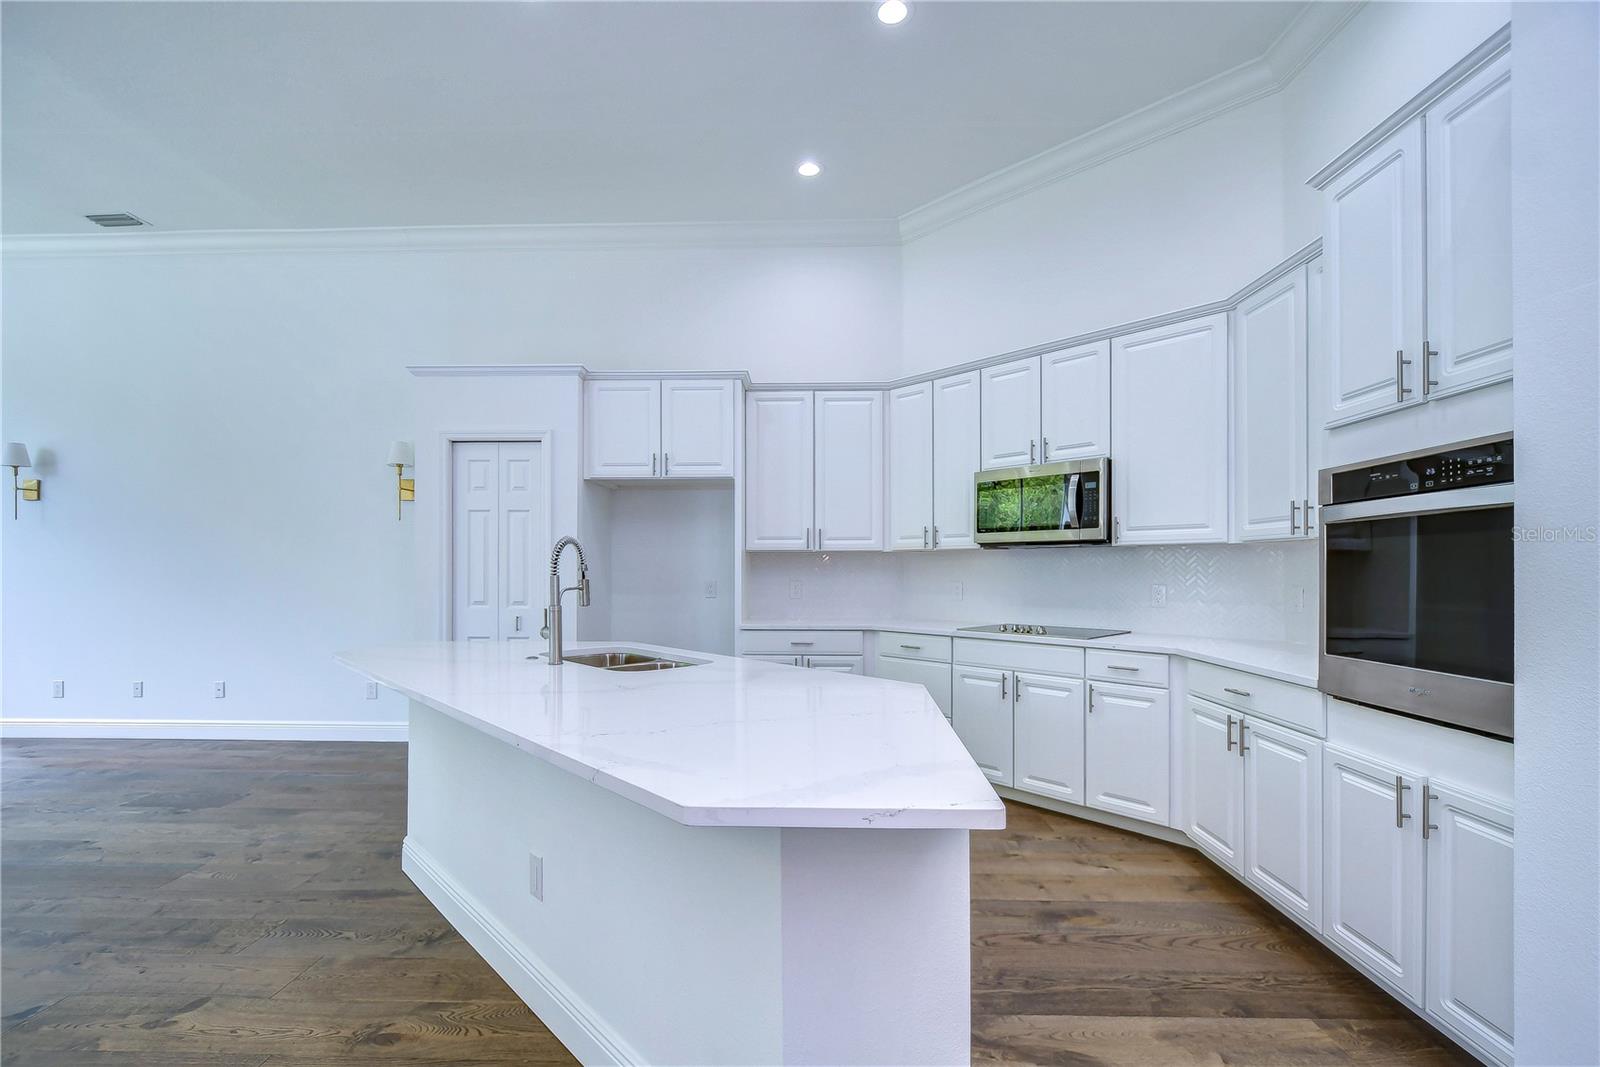 Sleek 42” white cabinets, luxurious Calacatta quartz countertops, and top-of-the-line stainless steel appliances!